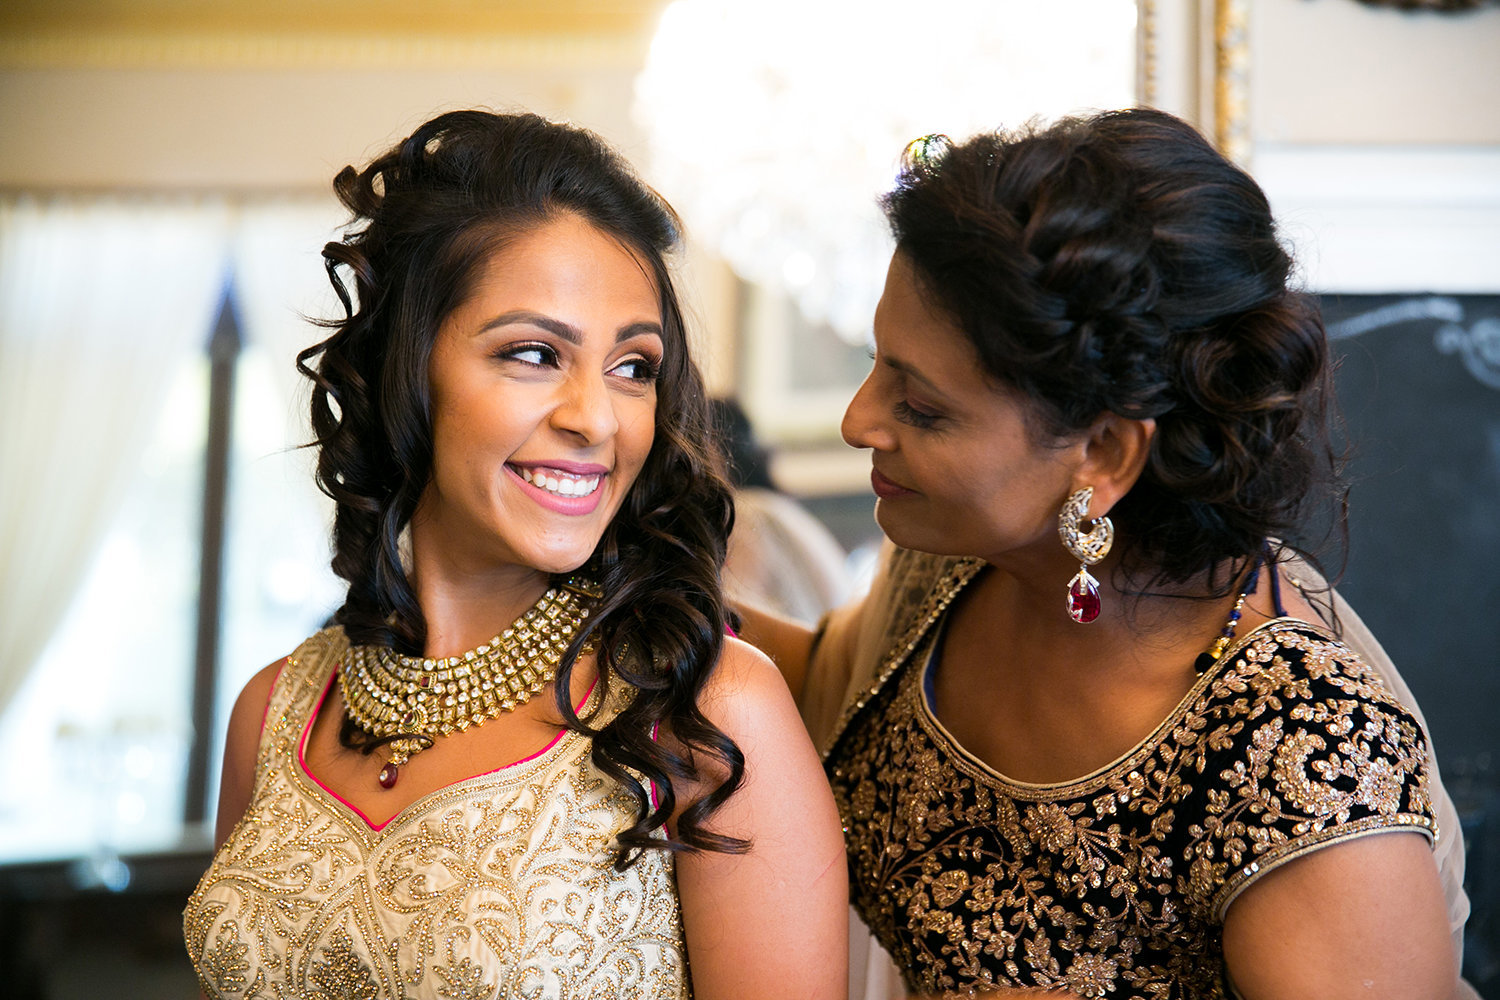 Sweet moment between mother and daughter before Hindu Indian wedding ceremony